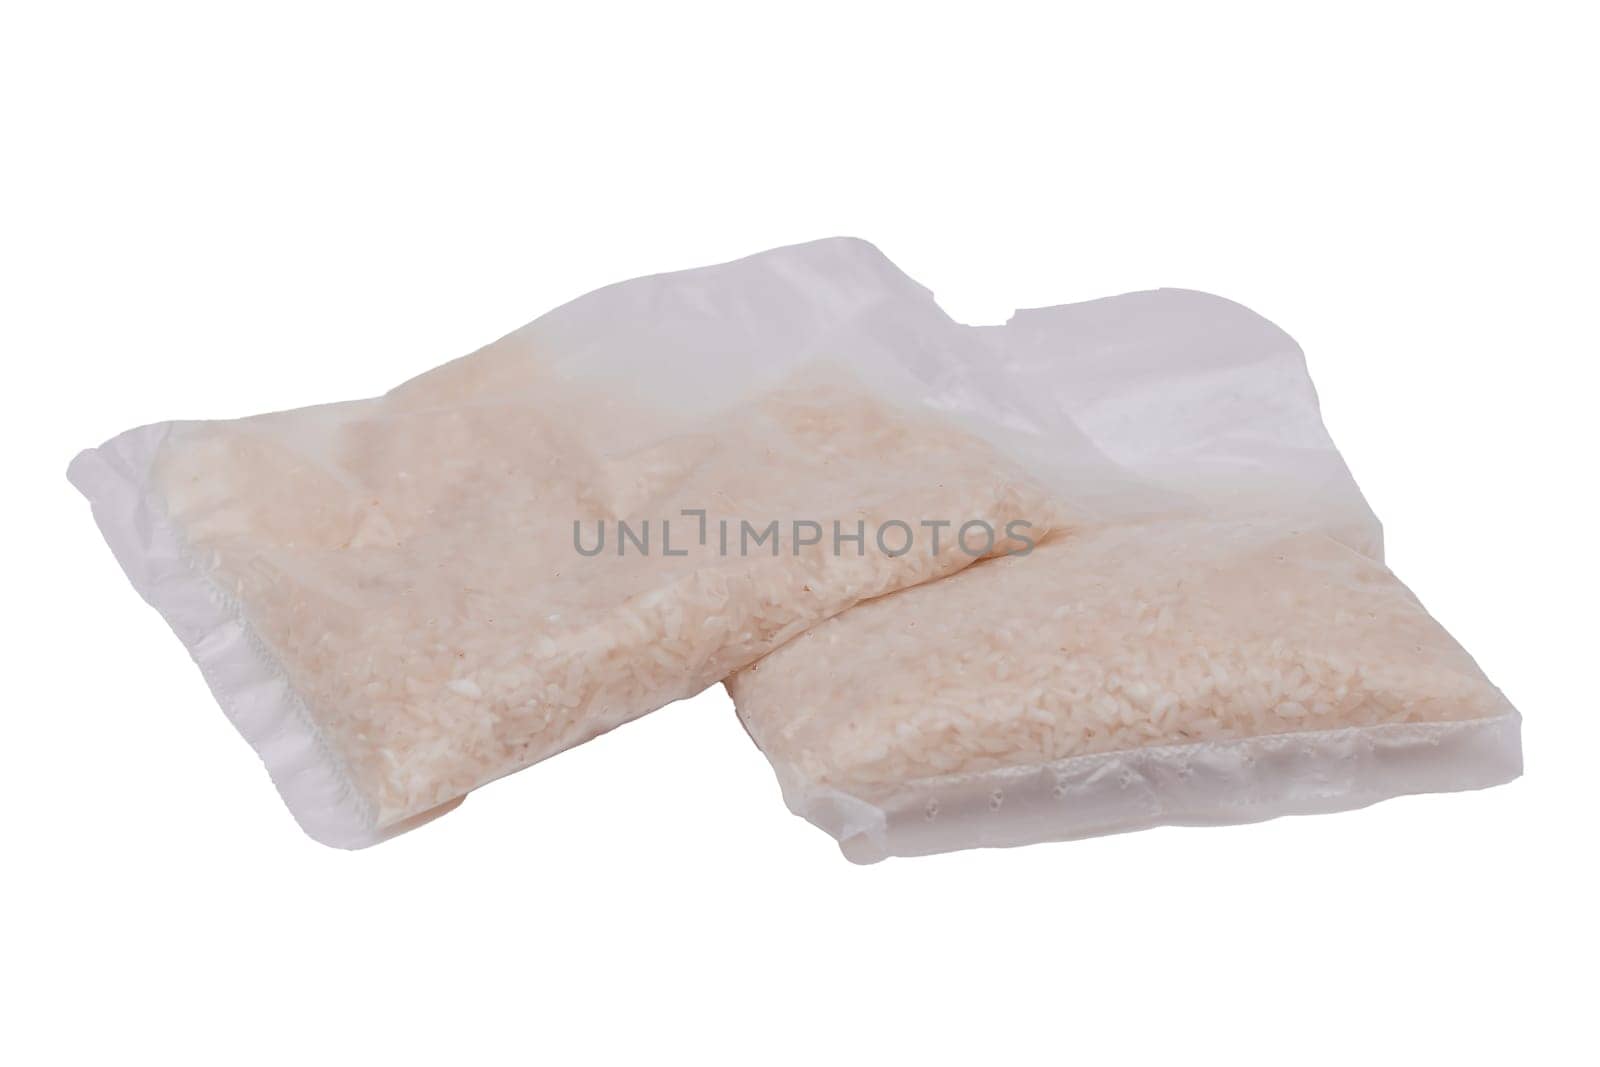 A Plastic Bags of White Long Grain Rice - Isolated on White by InfinitumProdux